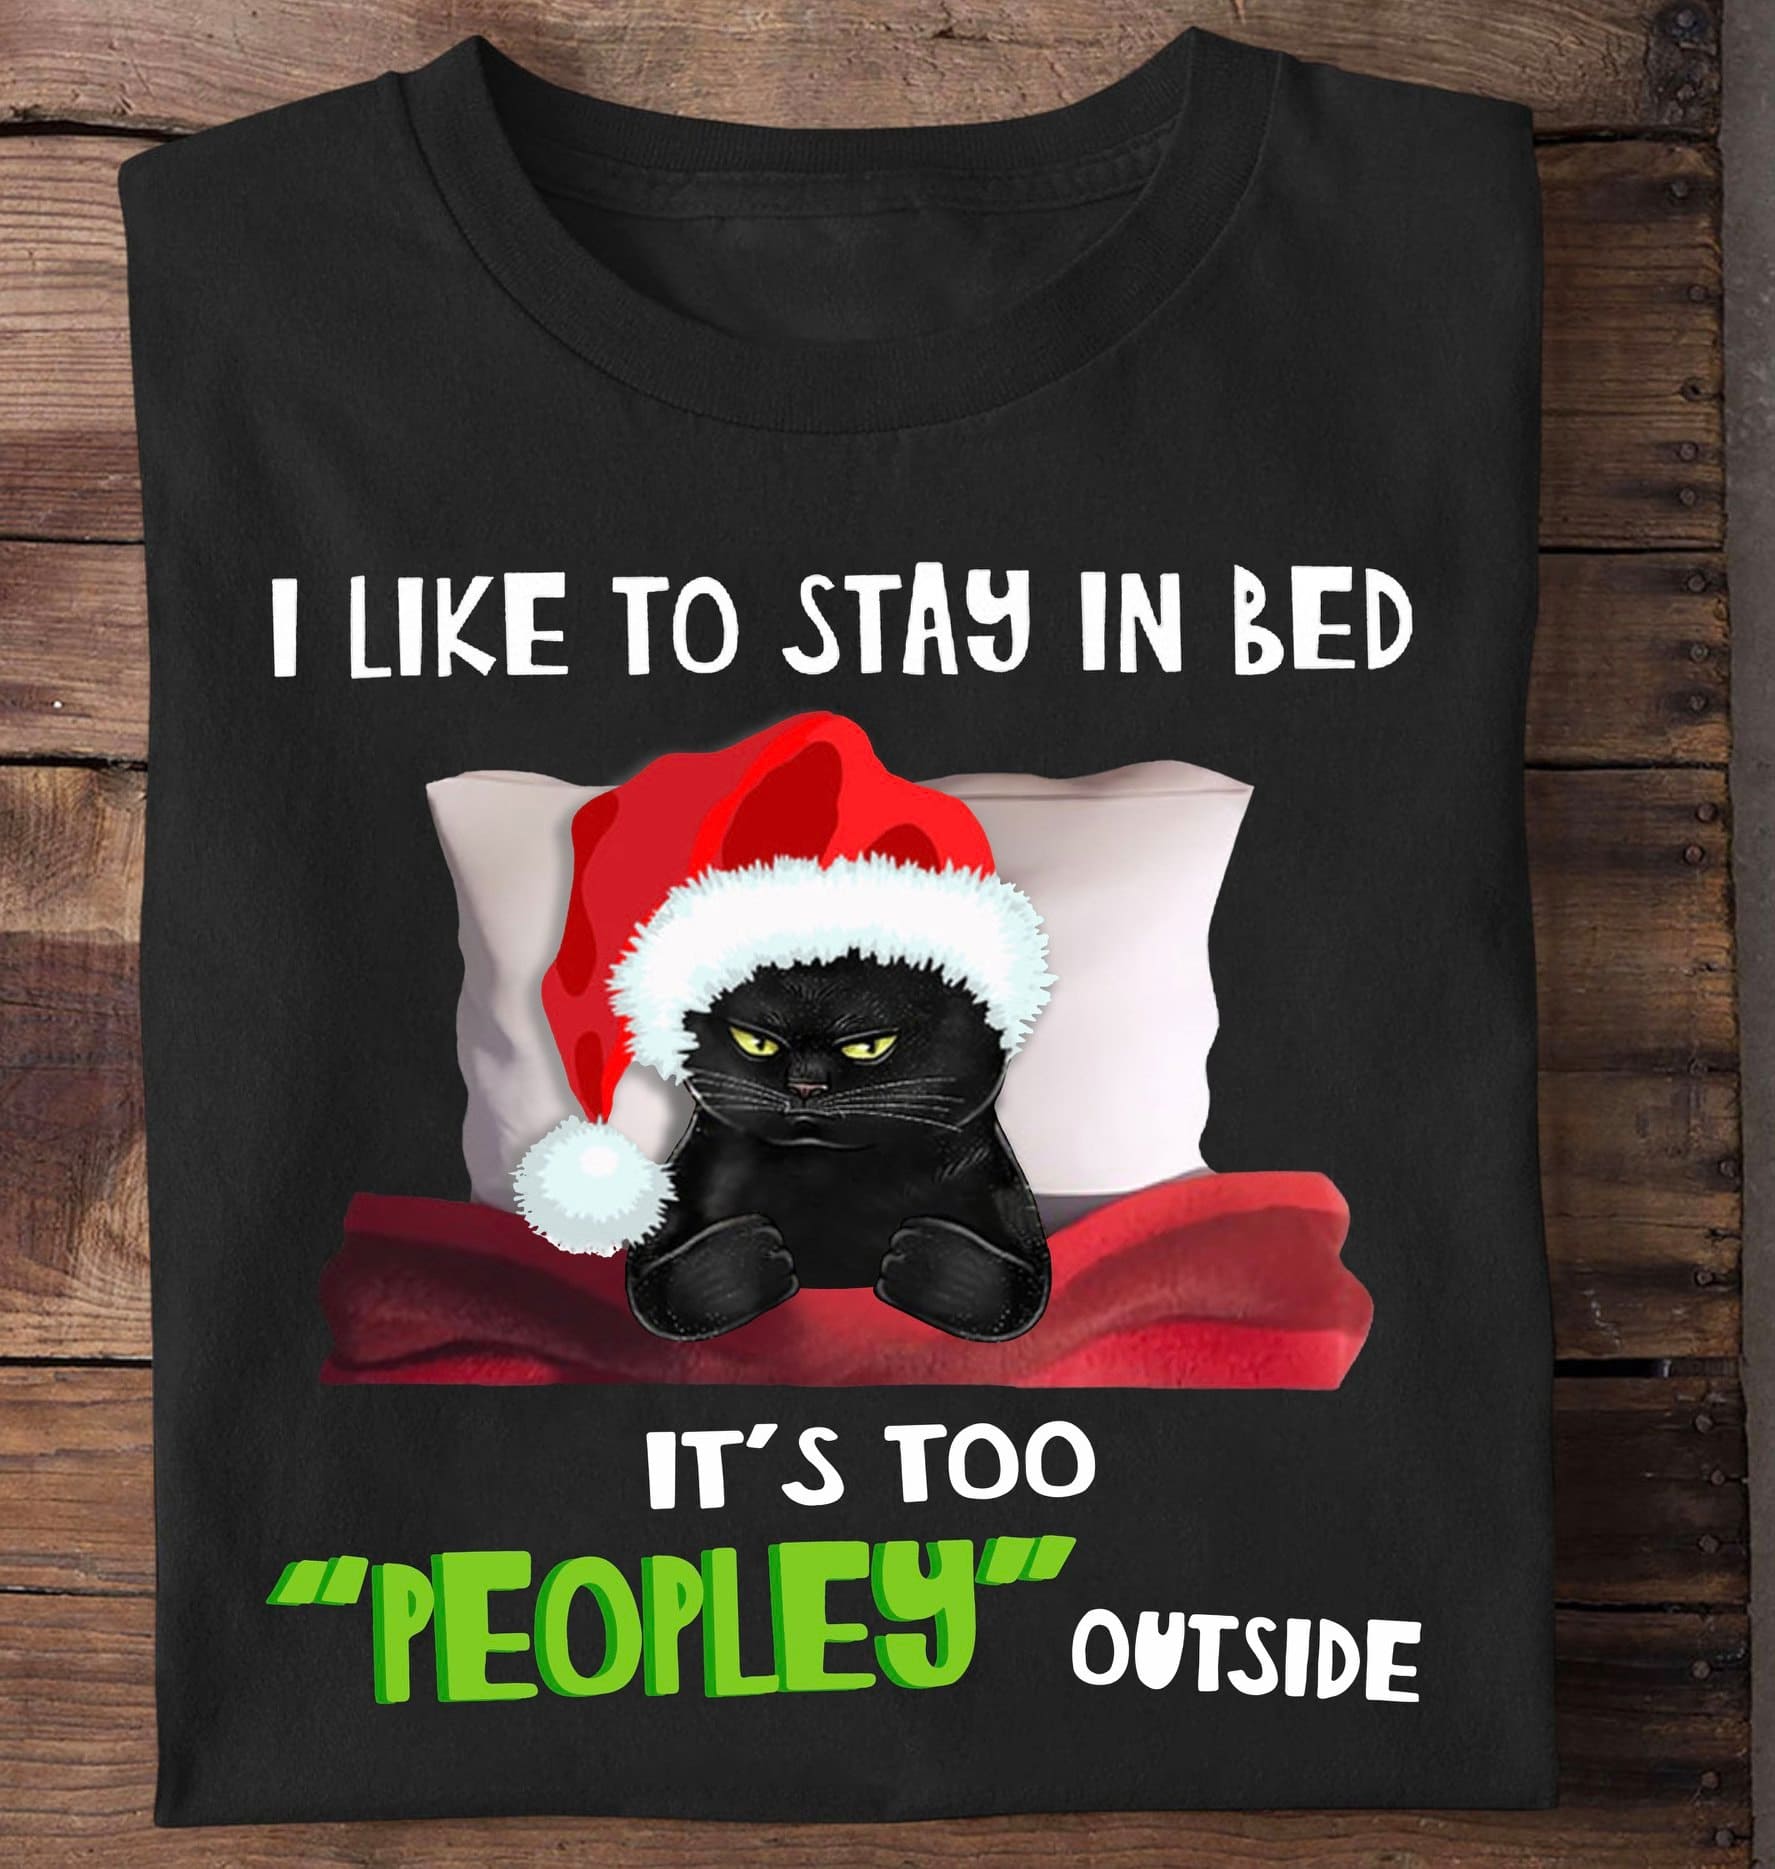 Black Cat Santa Hat Sleeping - I like to stay in bed it's too peopley outside